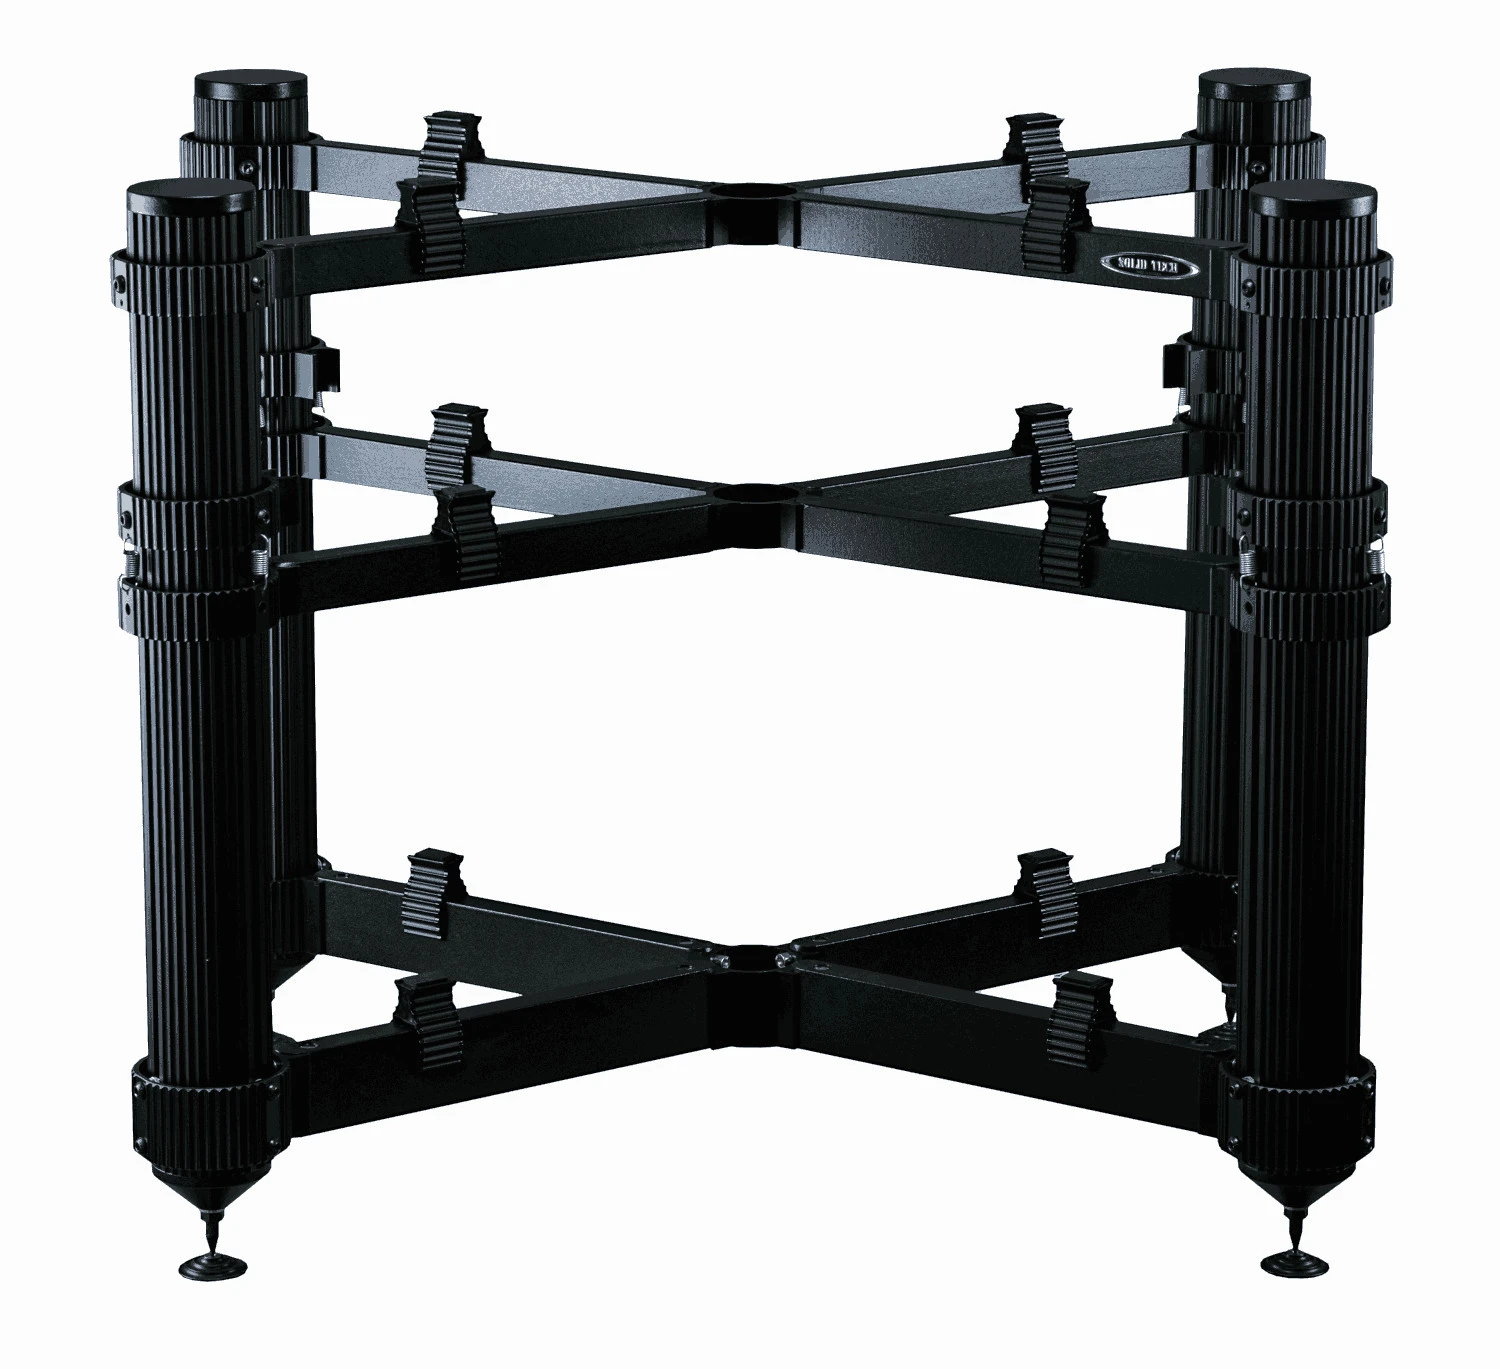 Solid Tech Rack of Silence Reference 3, Rack System